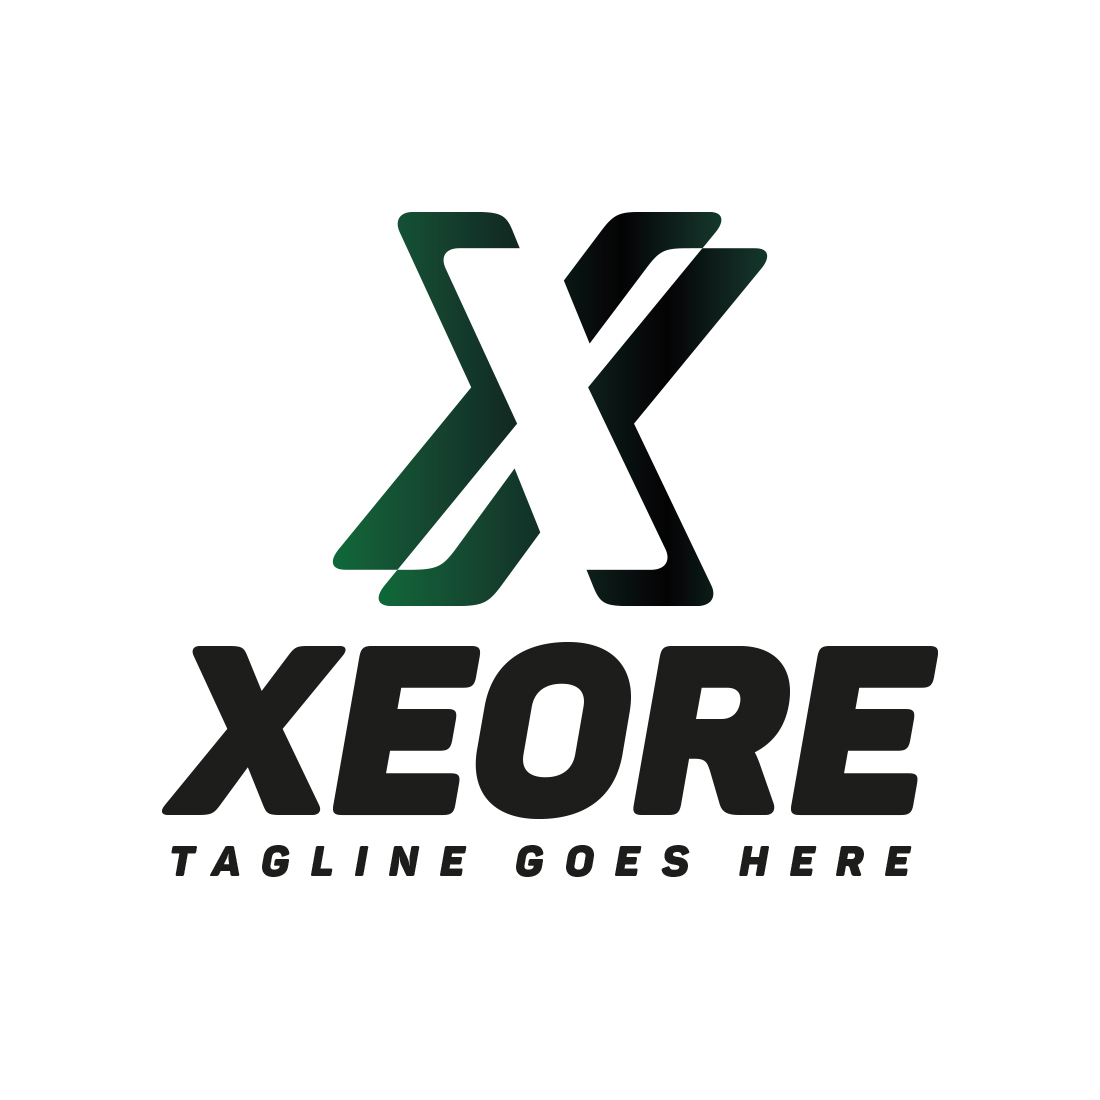 Letter X ( Xeore ) Geometrical logo design cover image.